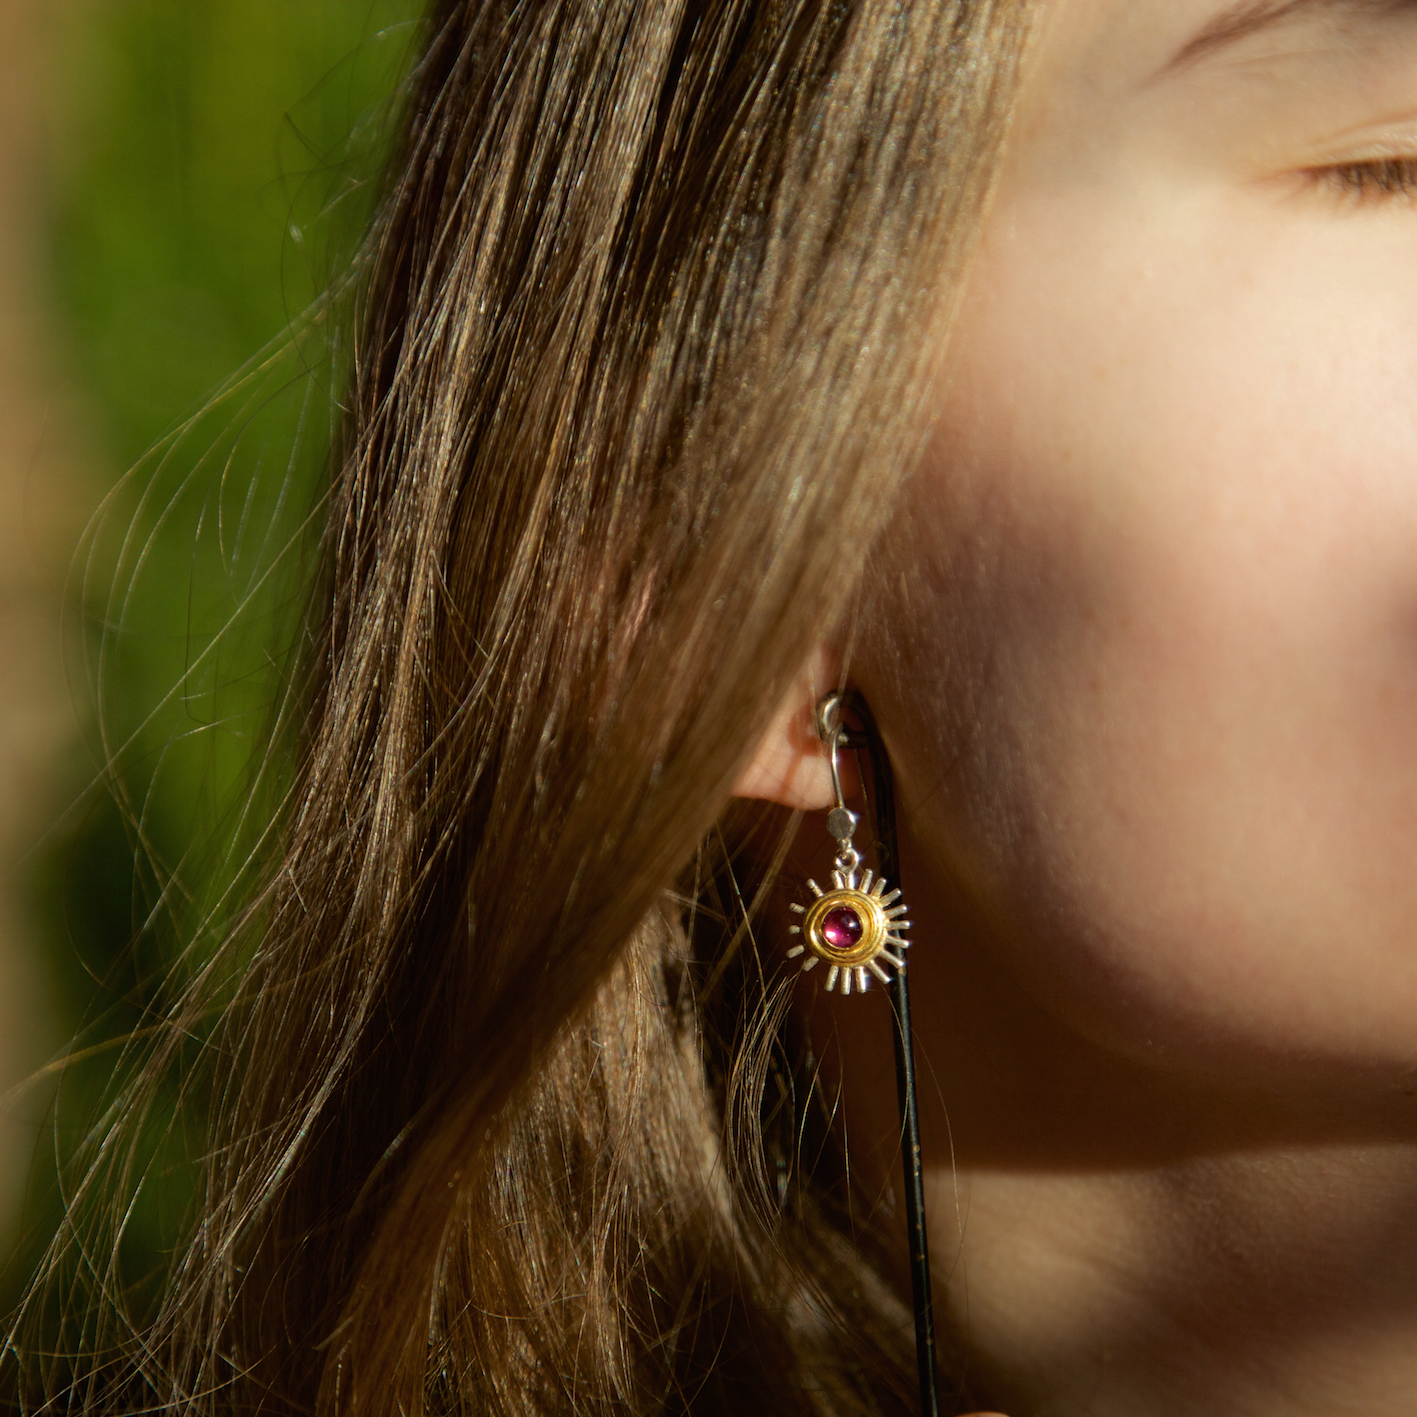 silver drop earrings with gold vermeil details, garnet stone in the centre. based on the Feverfew flower